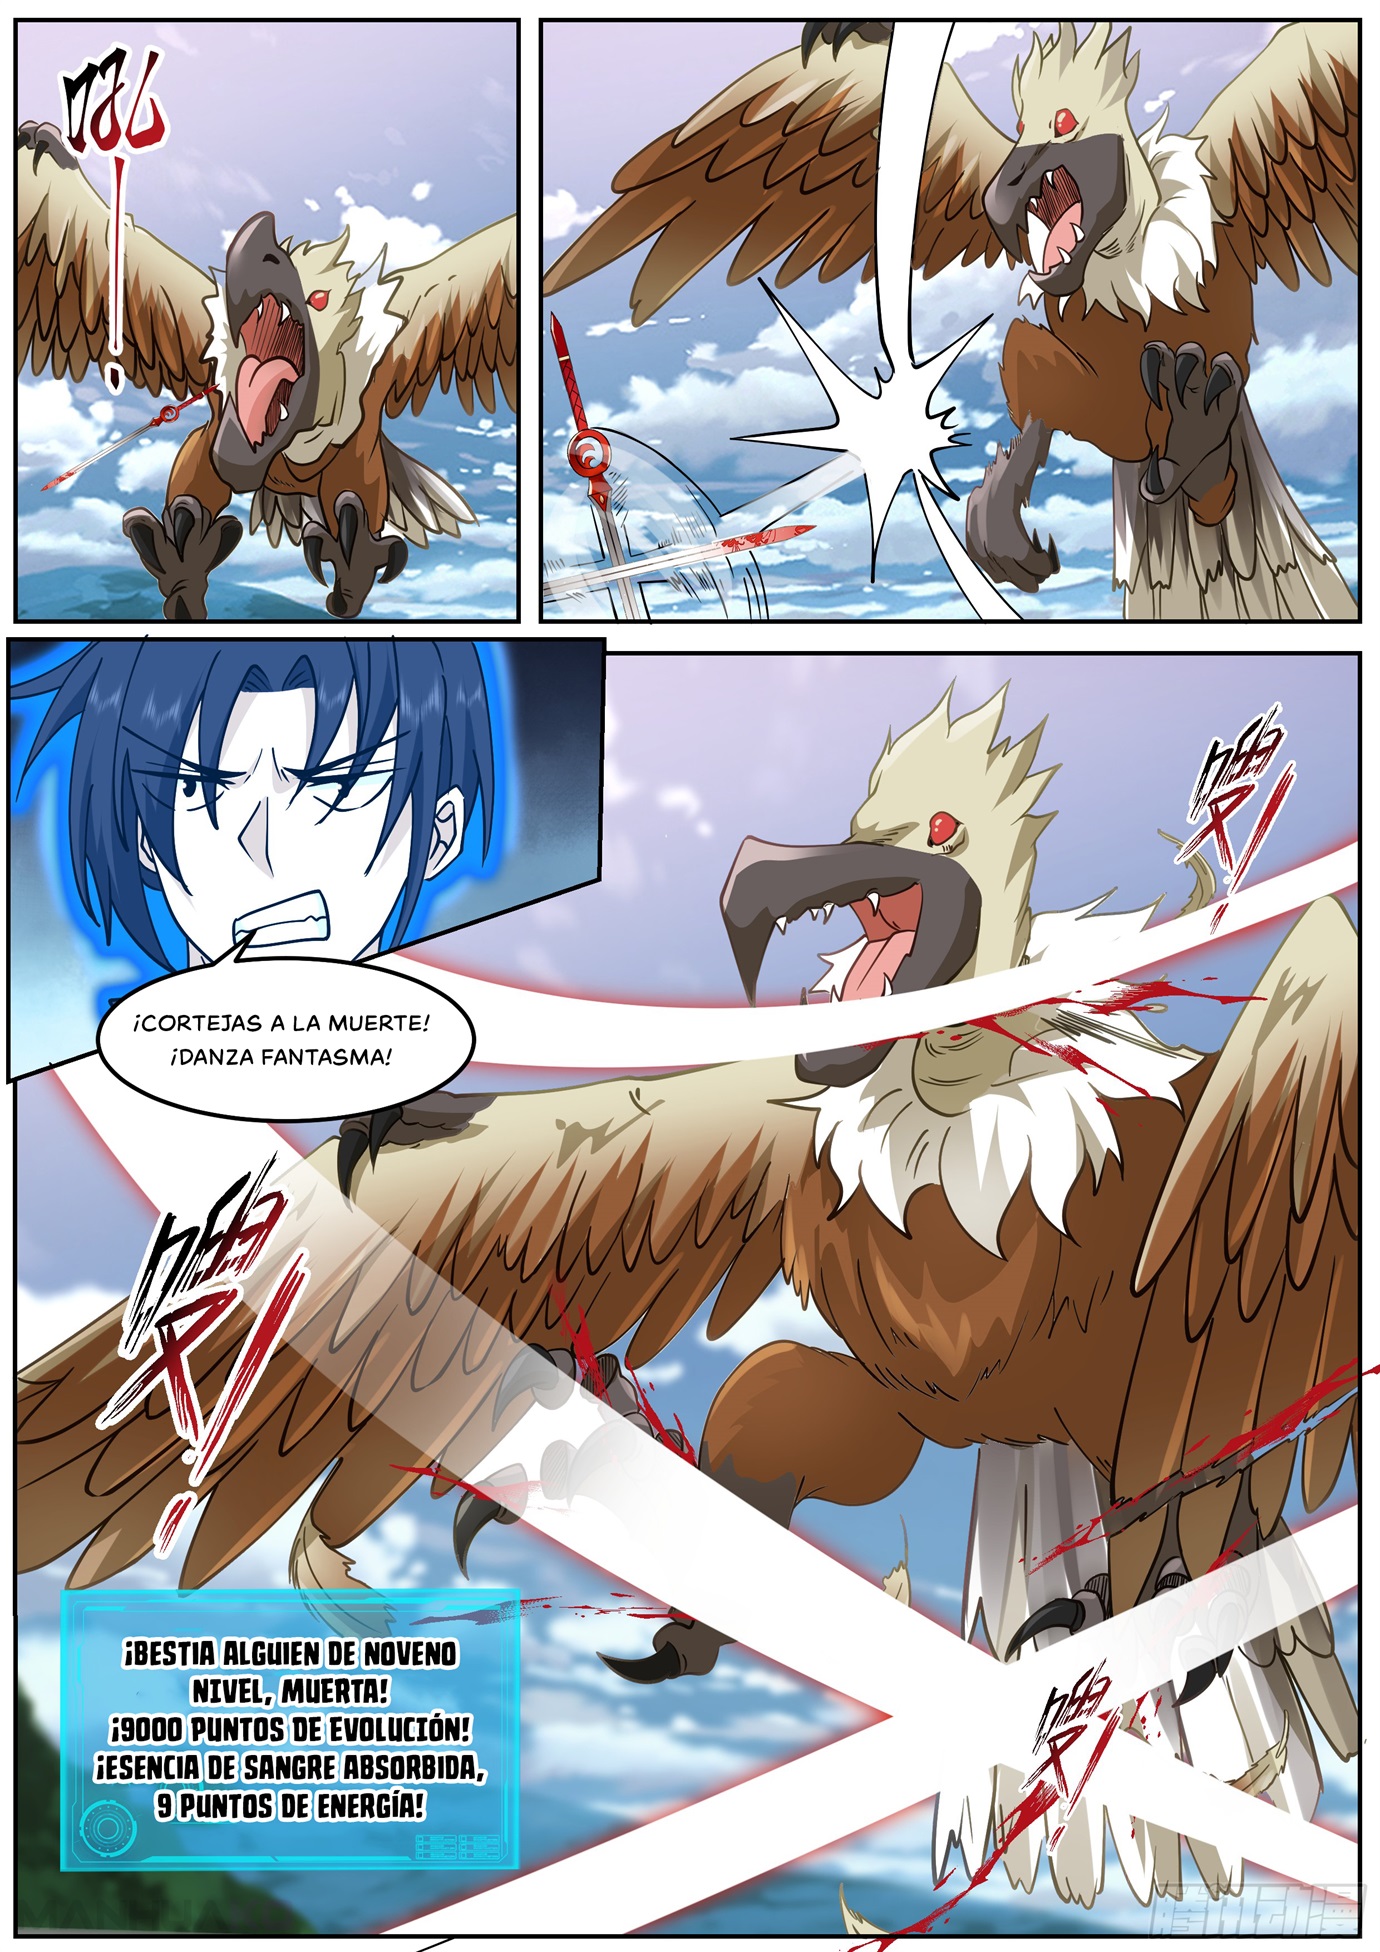 Manga Killing Evolution From a Sword Chapter 66 image number 1